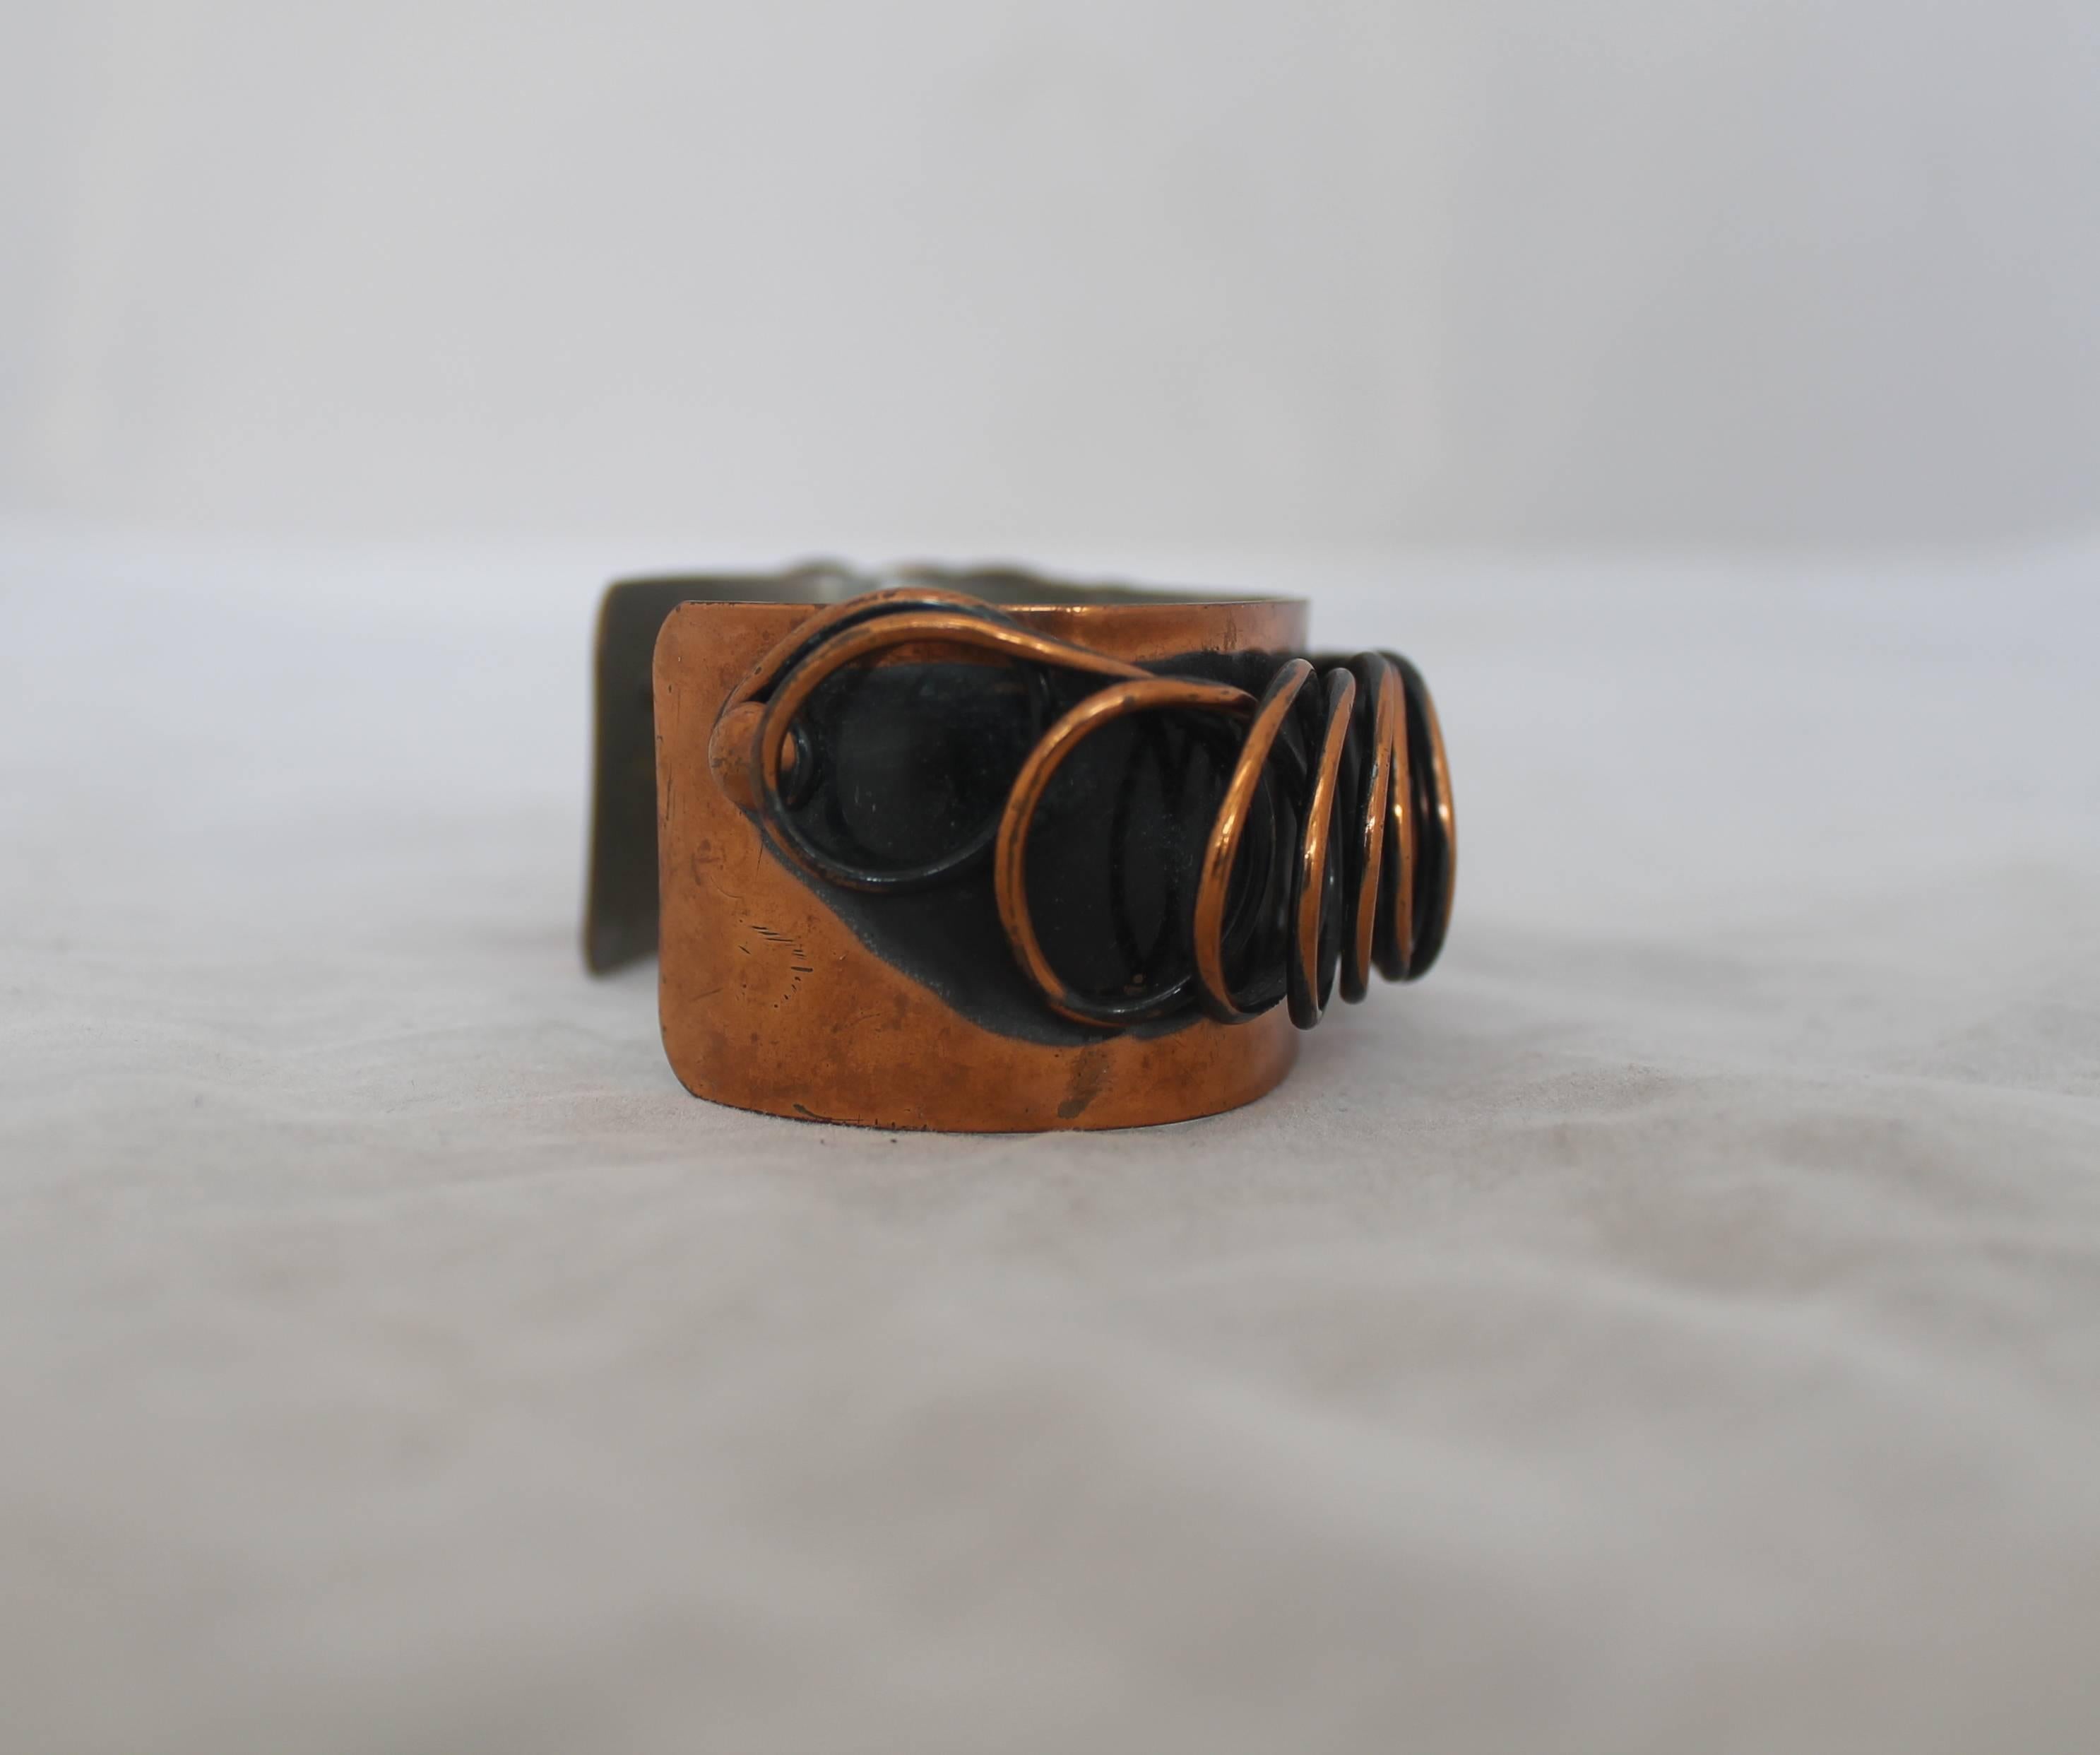 Renoir Vintage Handmade Copper Coil Cuff Bracelet - 1950's.  This unique vintage bracelet is in very good vintage condition with only minor wear consistent with its age.  It features a black band painted behind the coil to add depth to the coil